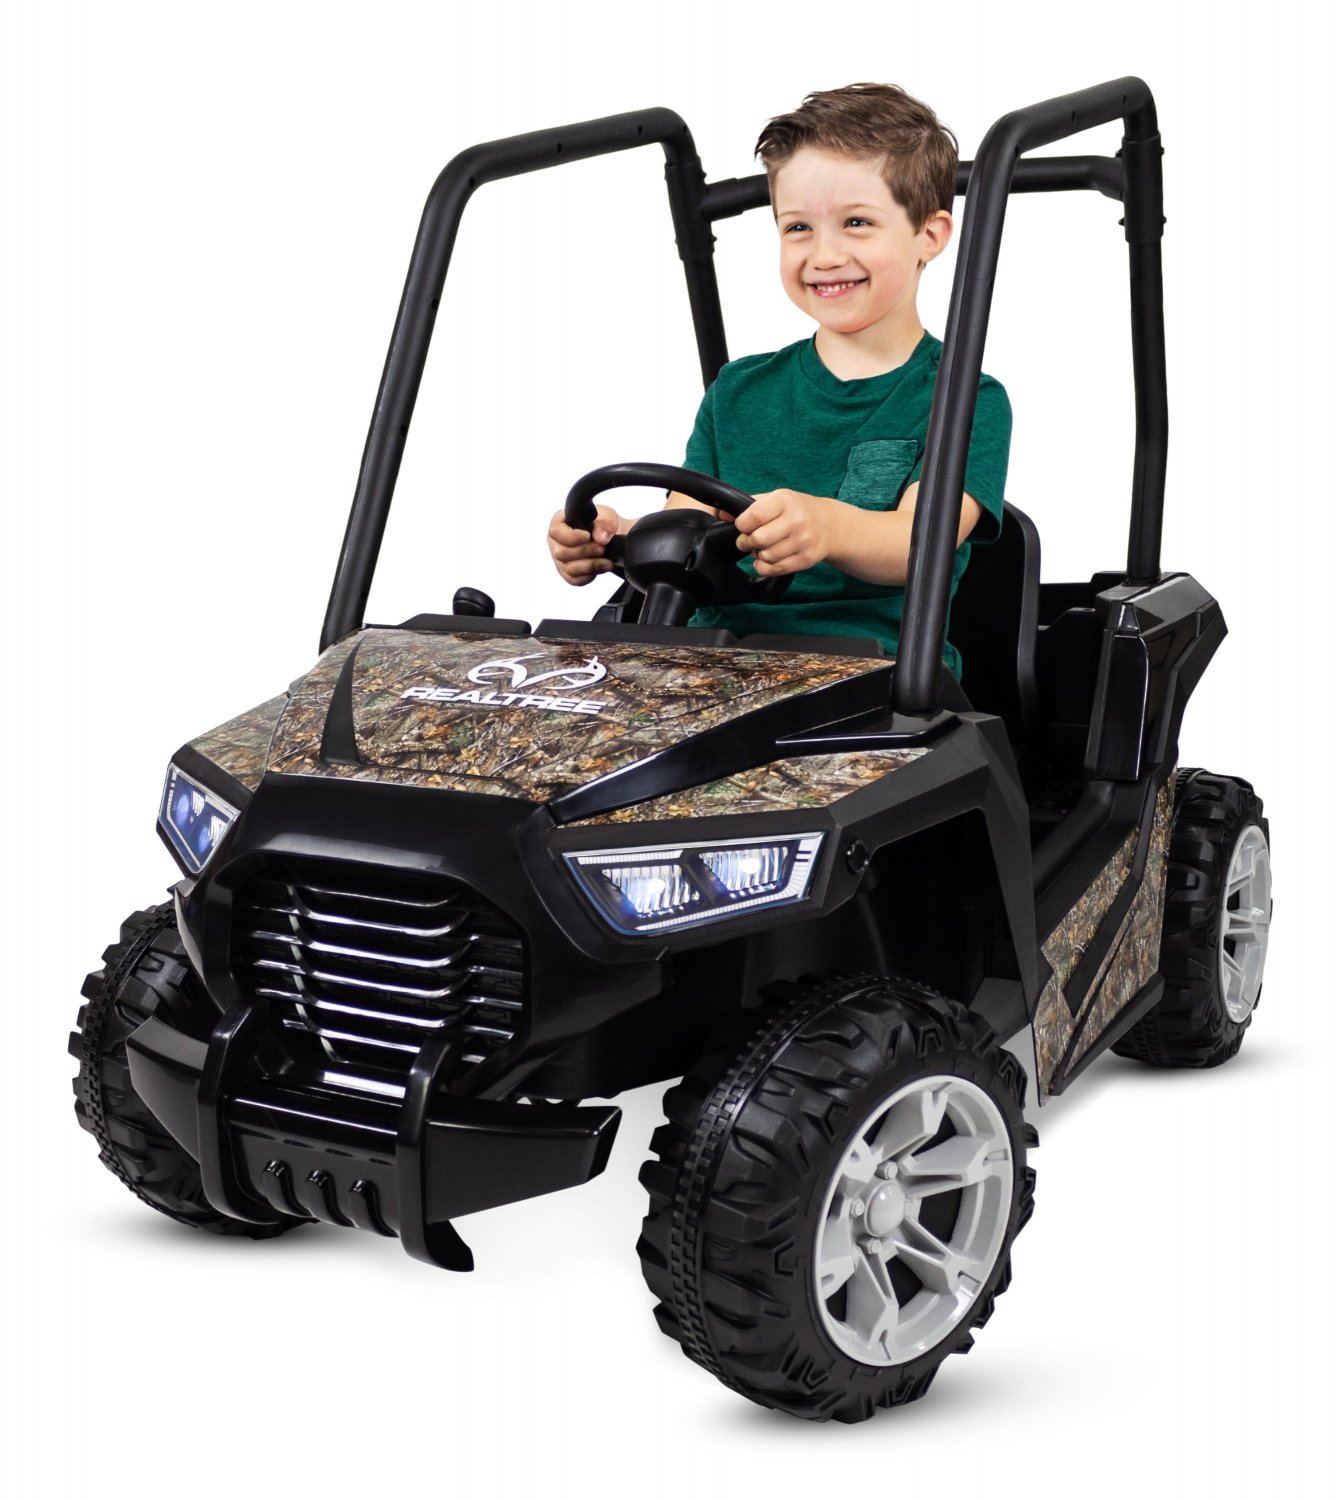 Realtree Whipsaw UTV Ride-On Toy by Kid Trax, rechargeable powered vehicle, boys or girls, camo, ATV